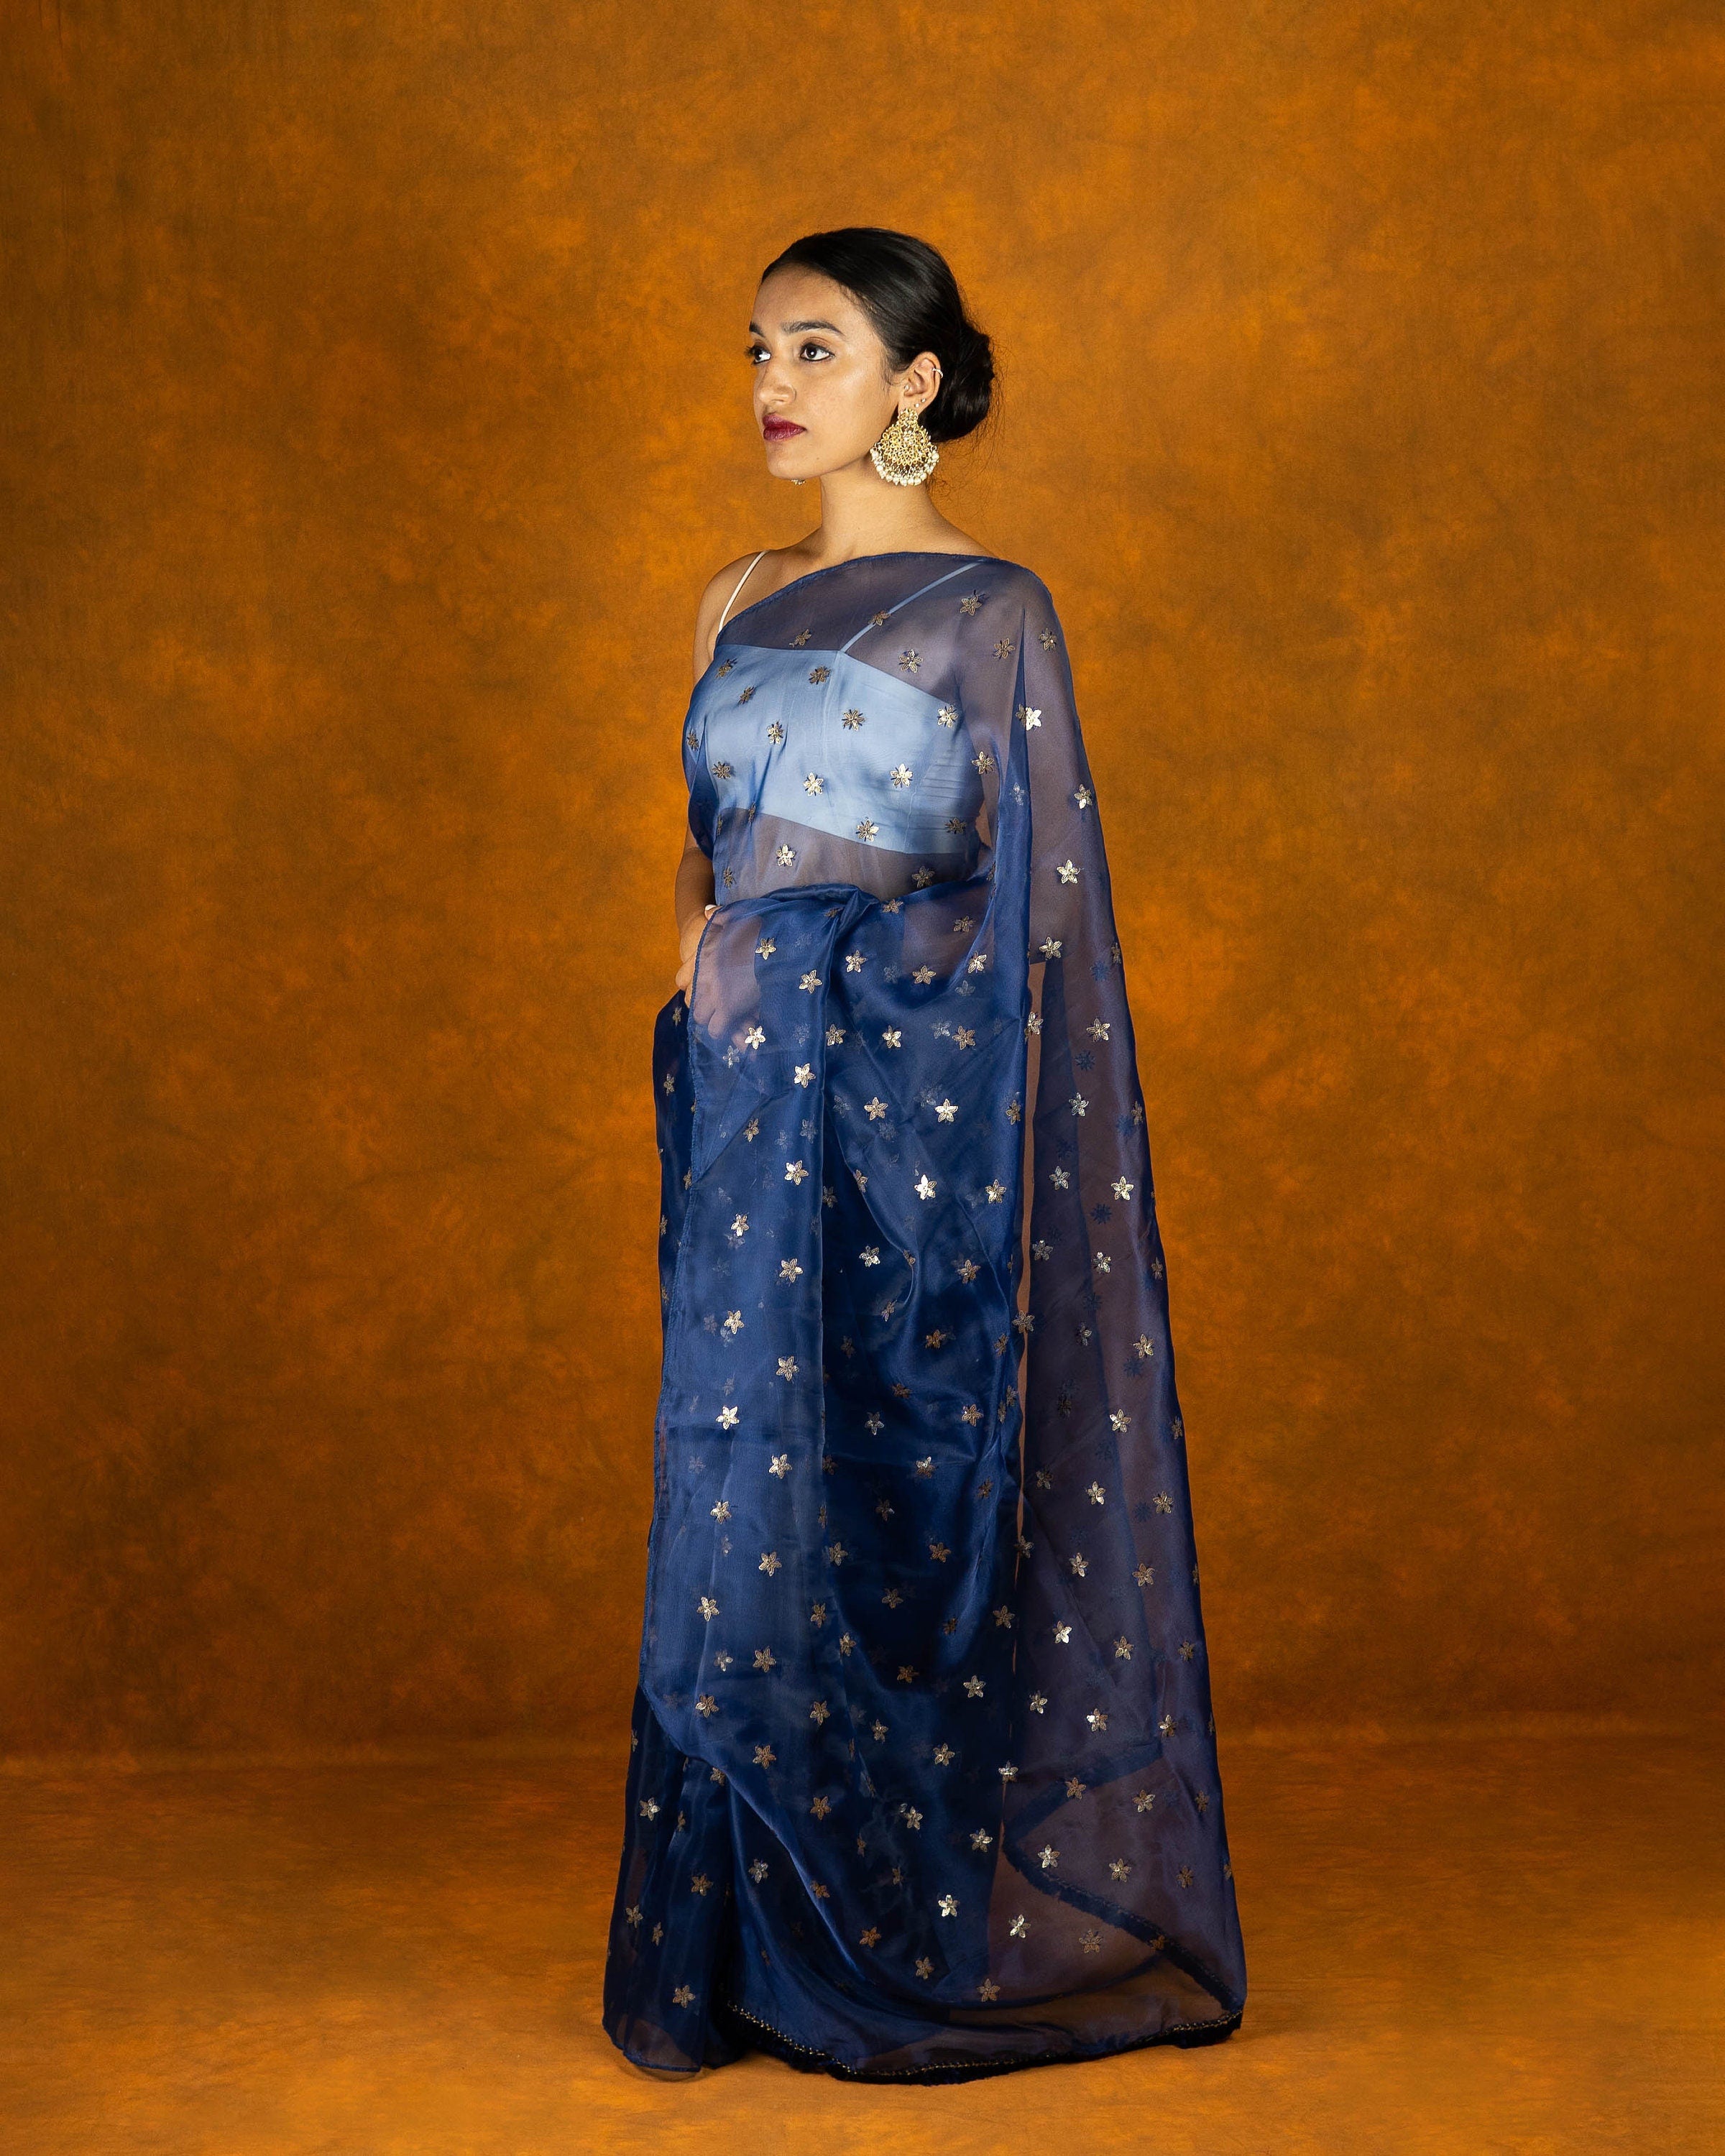 Royal blue Organza blend embroidery saree with gold work border and tassels